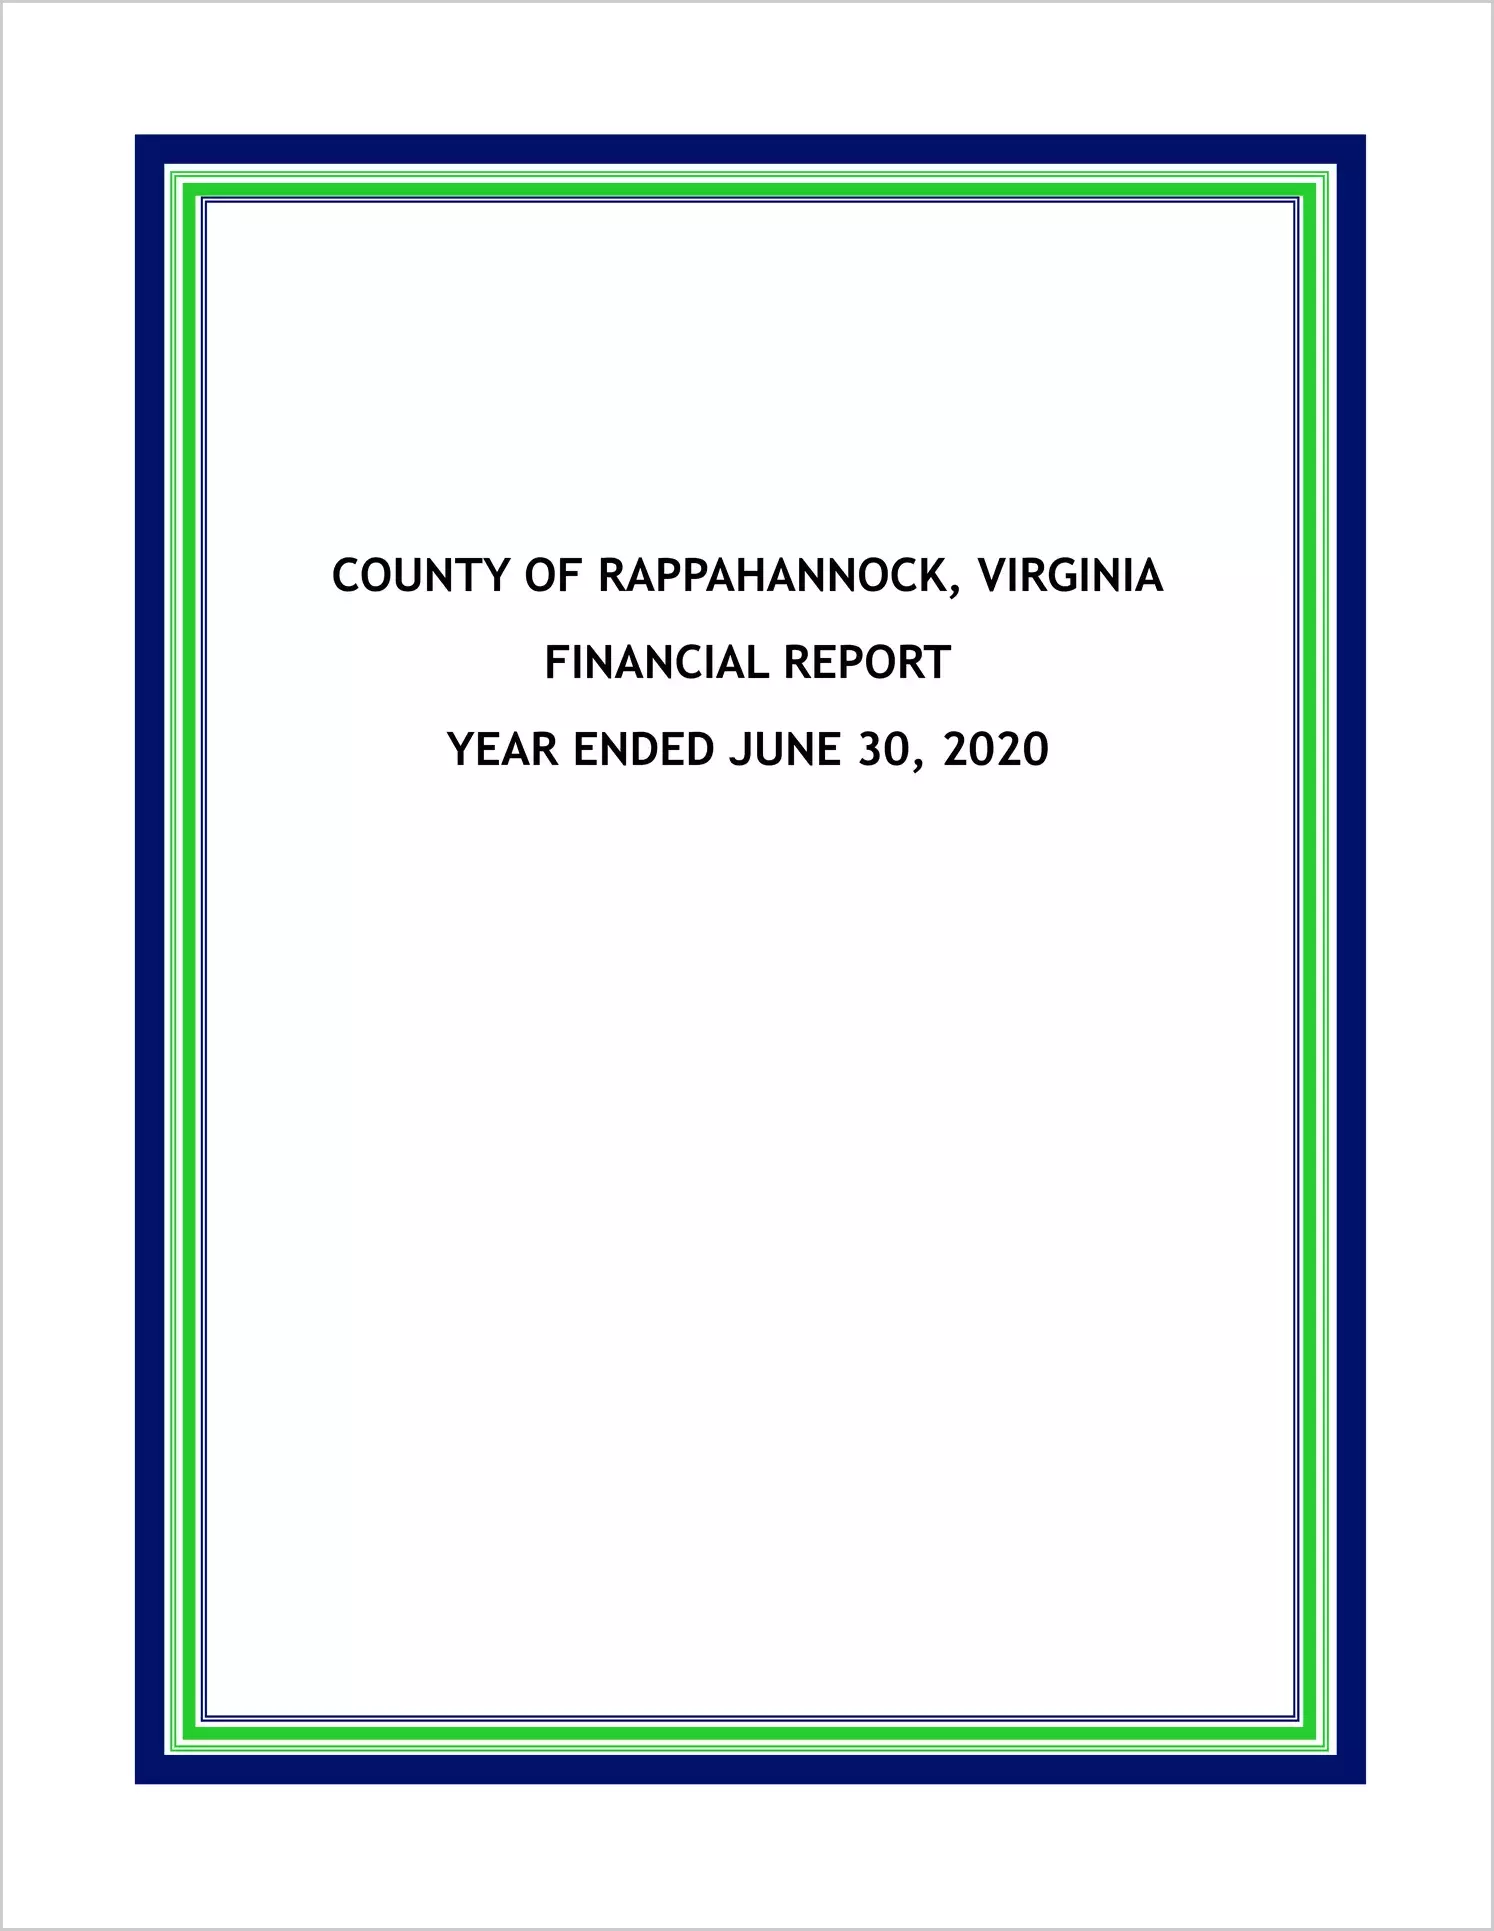 2020 Annual Financial Report for County of Rappahannock